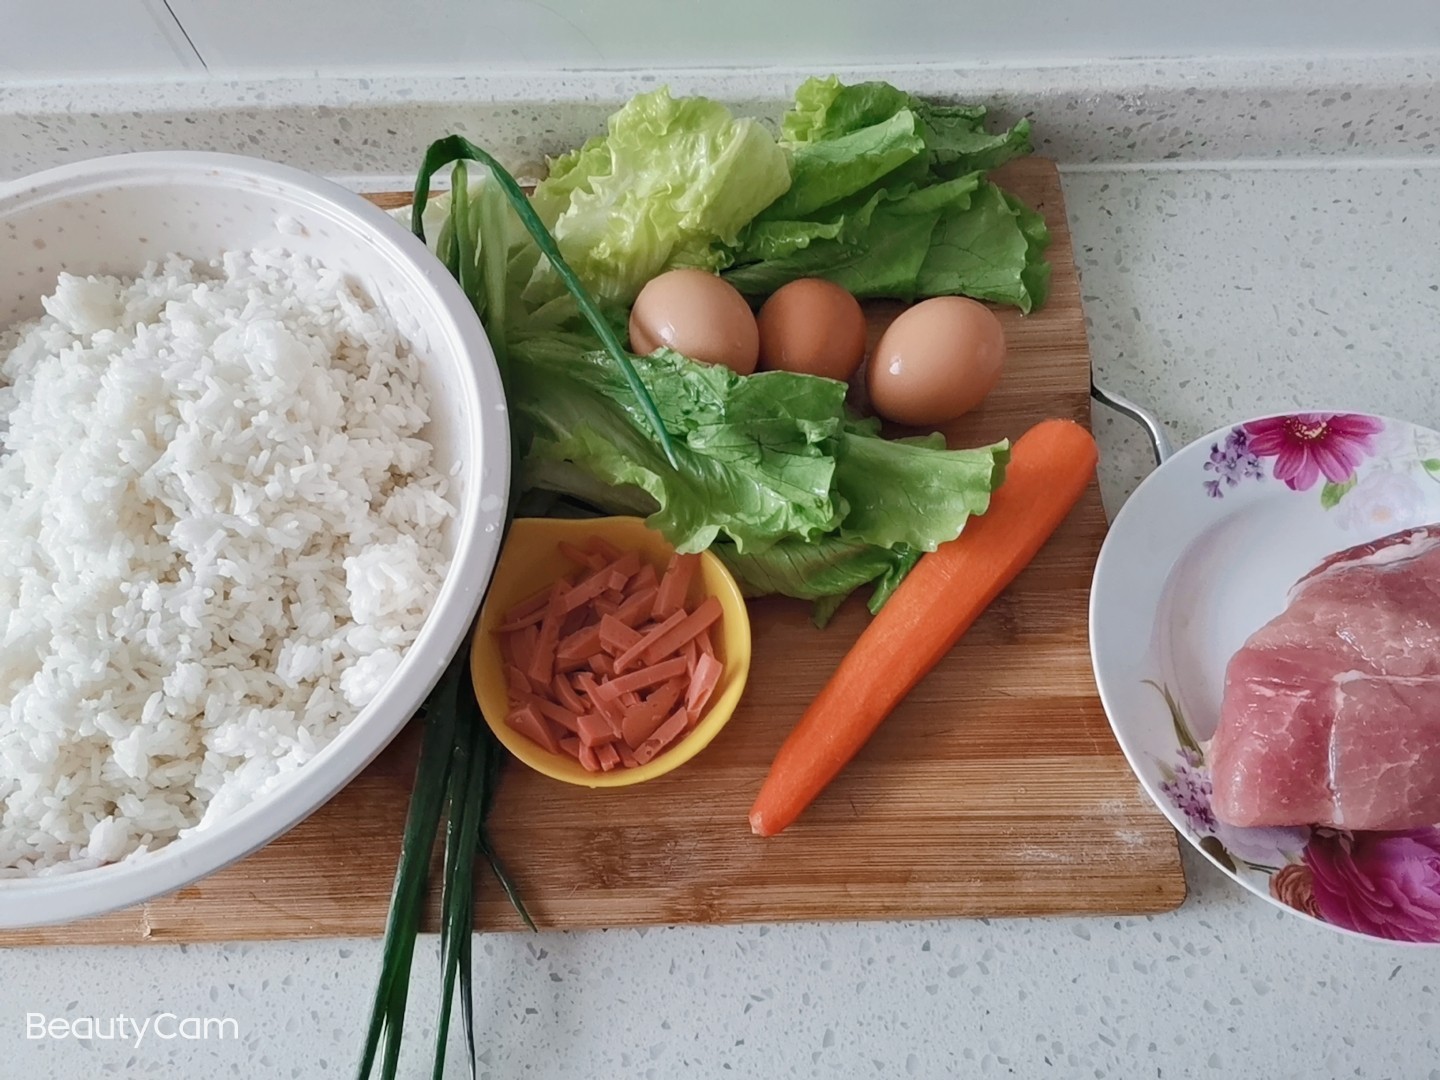 Different Assorted Fried Rice recipe